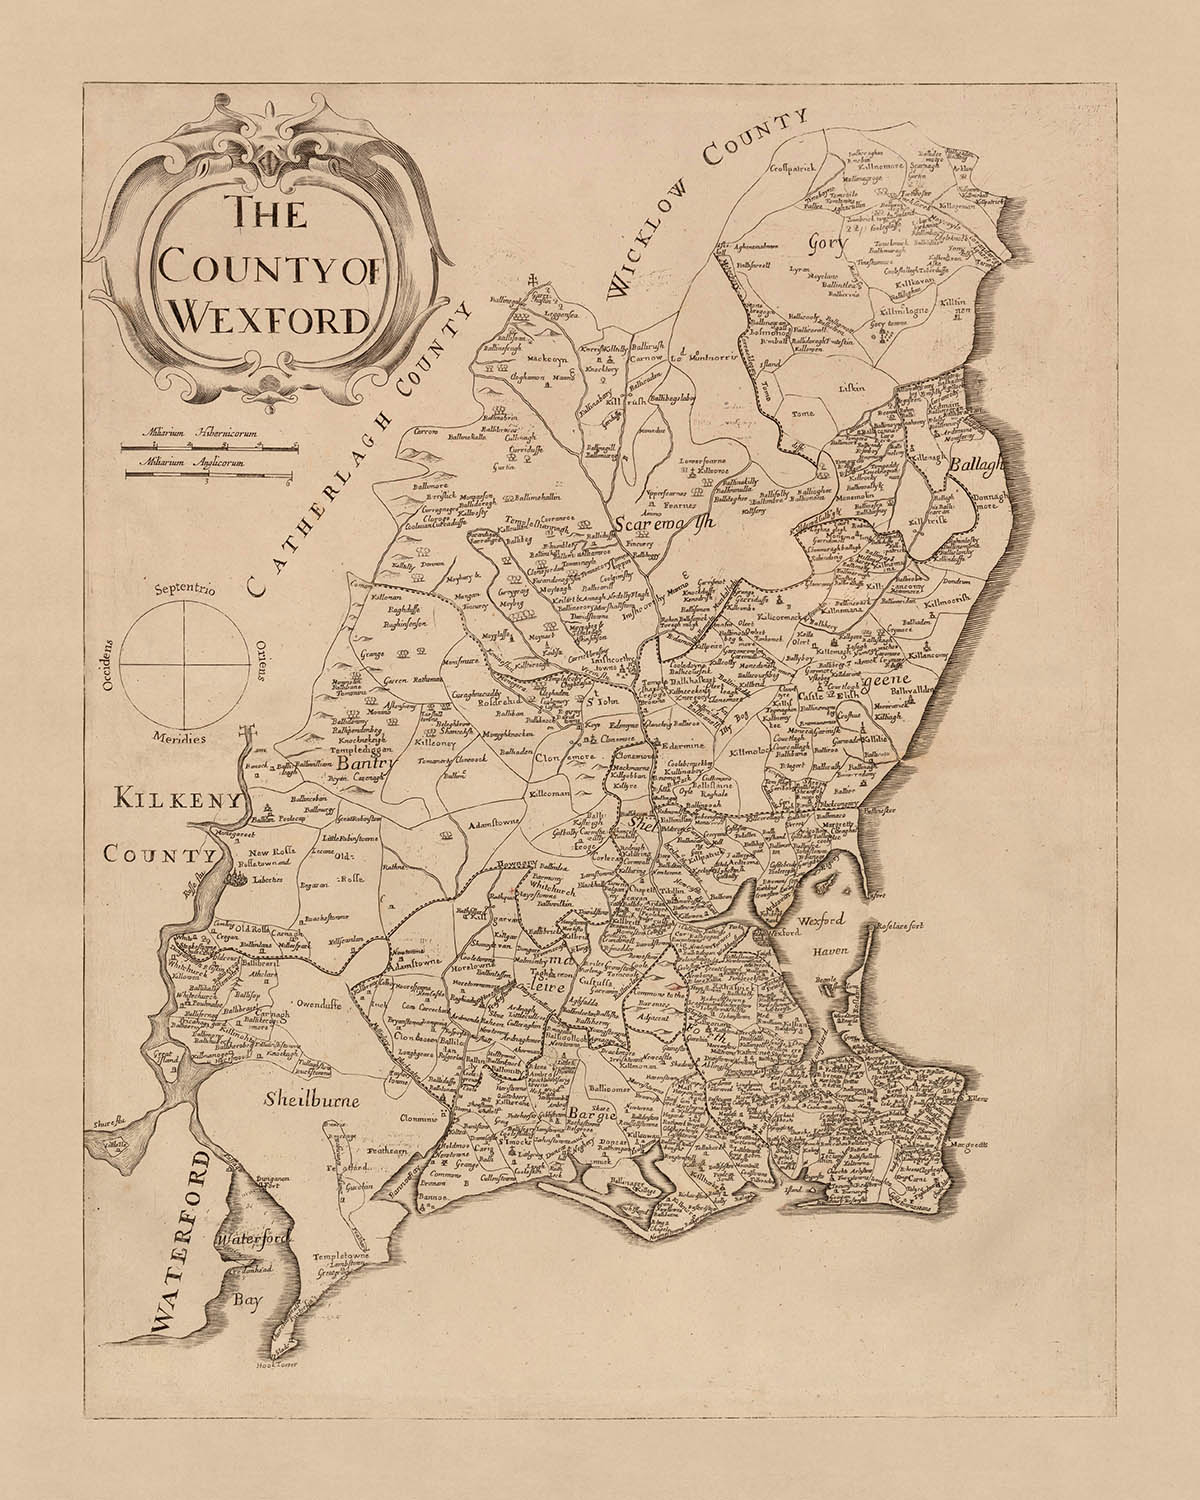 Old Map of County Wexford by Petty, 1685: Clonmines, Enniscorthy, New Ross, Bannow, Duncormick